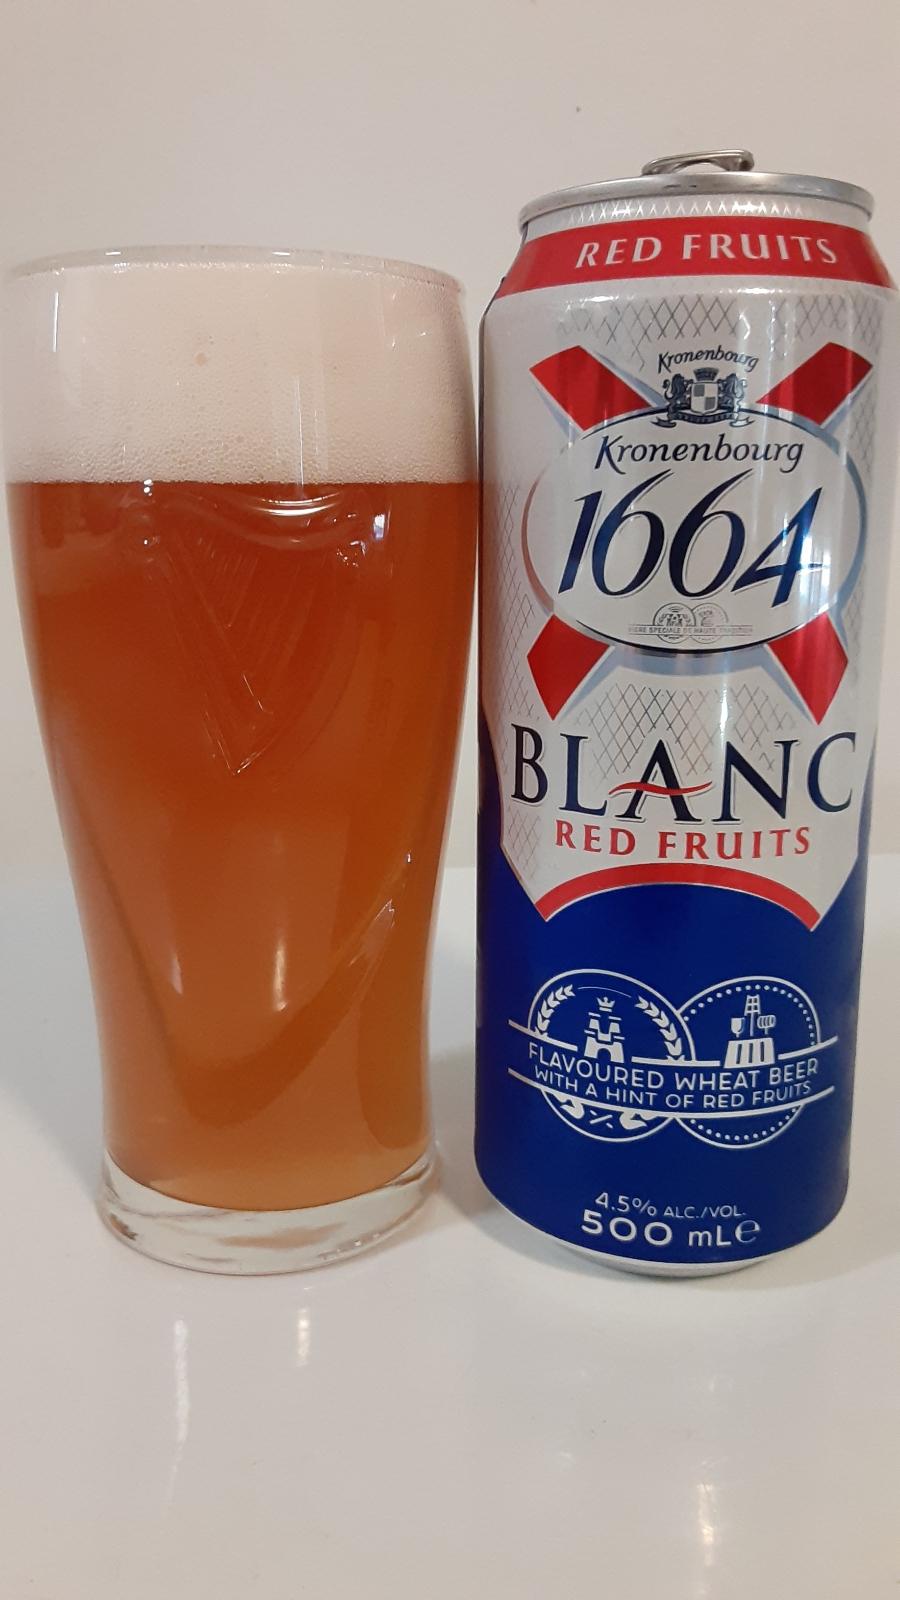 1664 Blanc Red Fruits